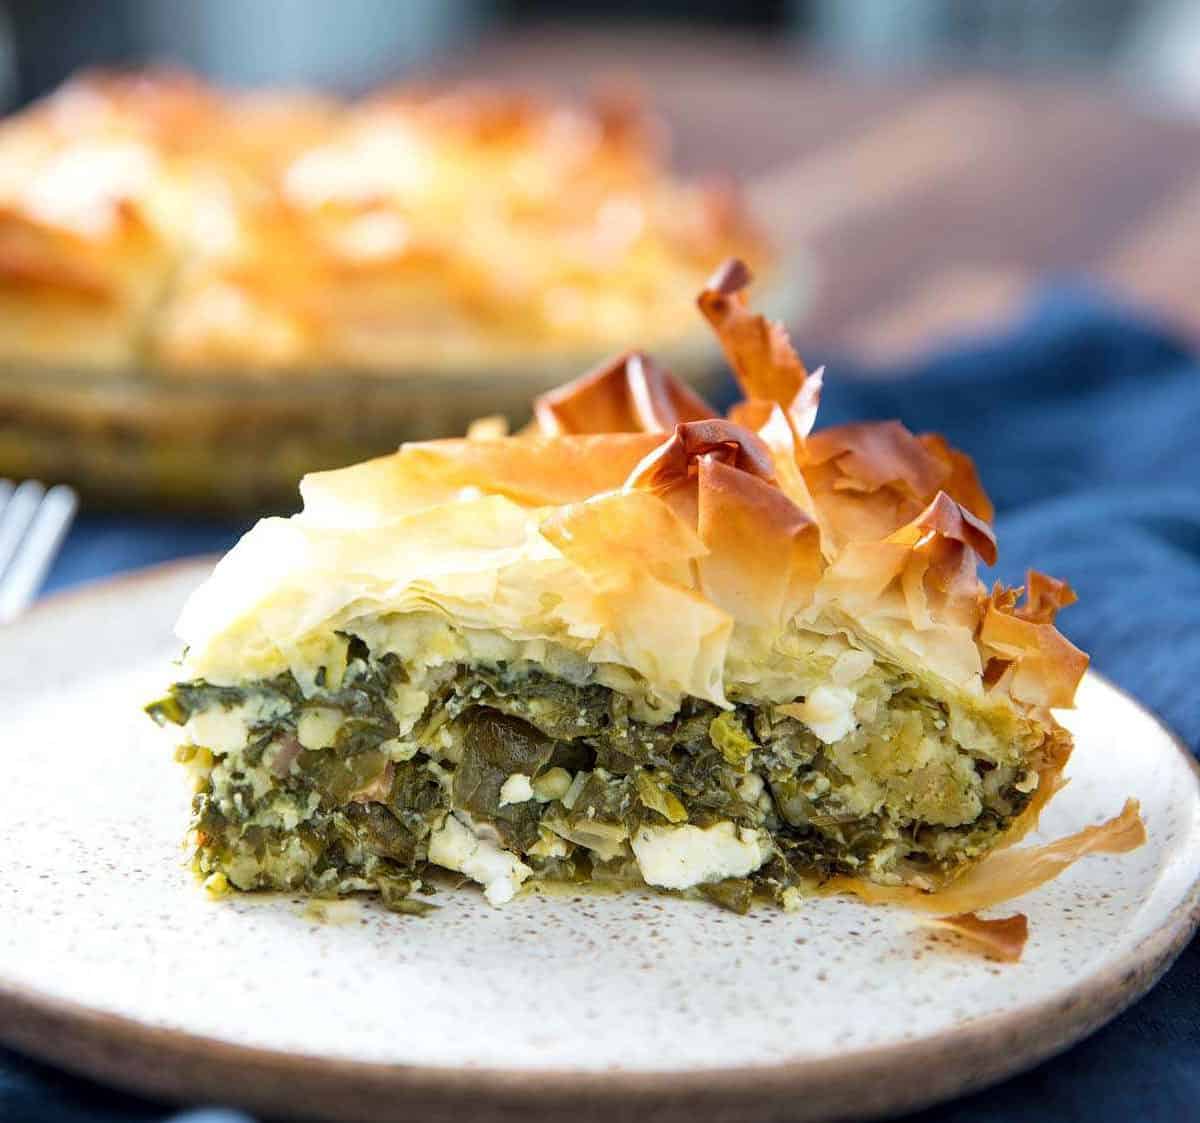  A sprinkling of sesame seeds adds a nutty flavor to this flaky savory pie